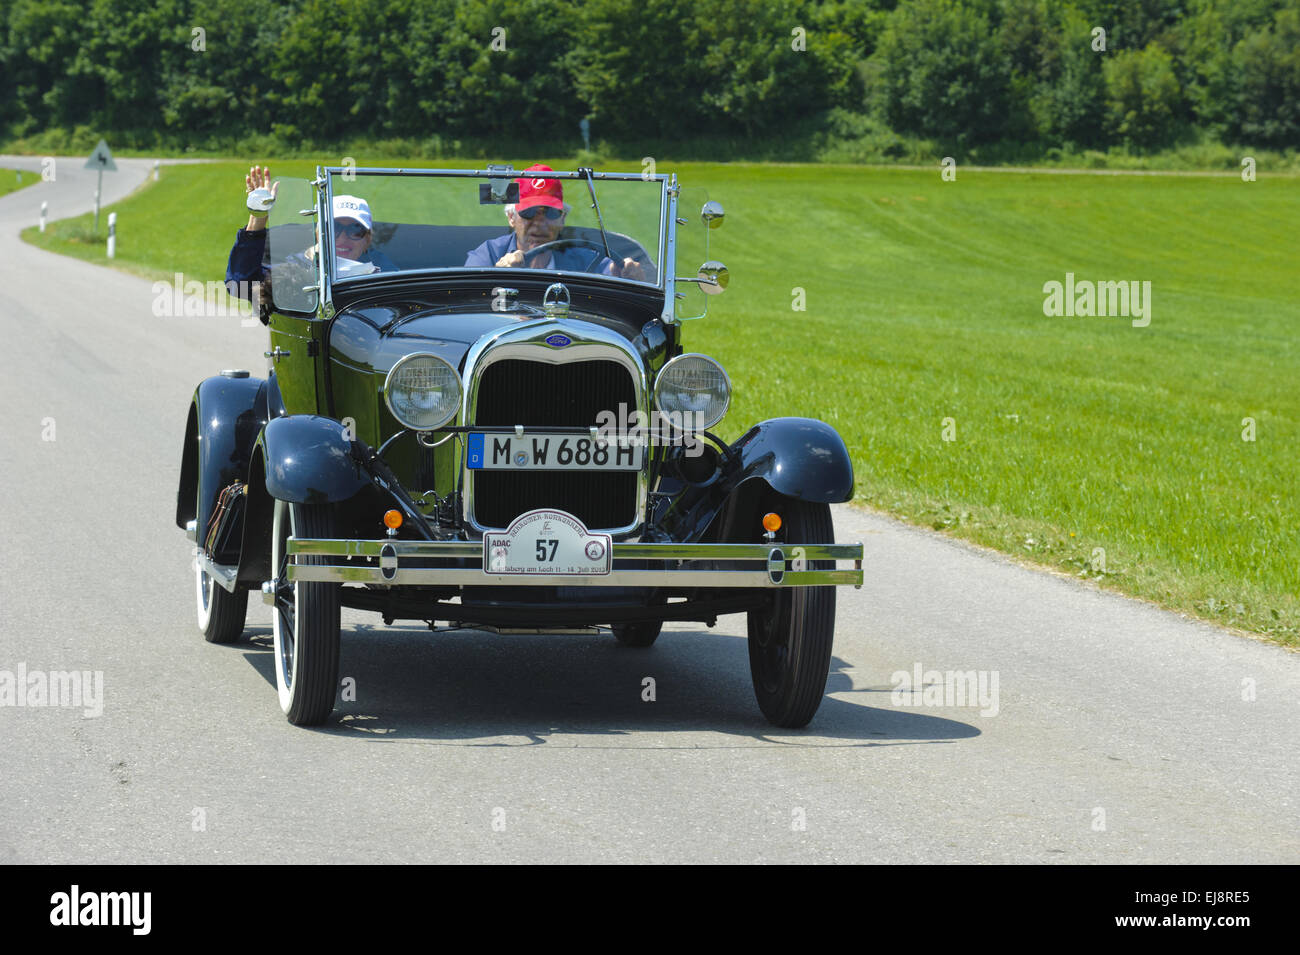 Oldtimer rally for old antique cars Stock Photo